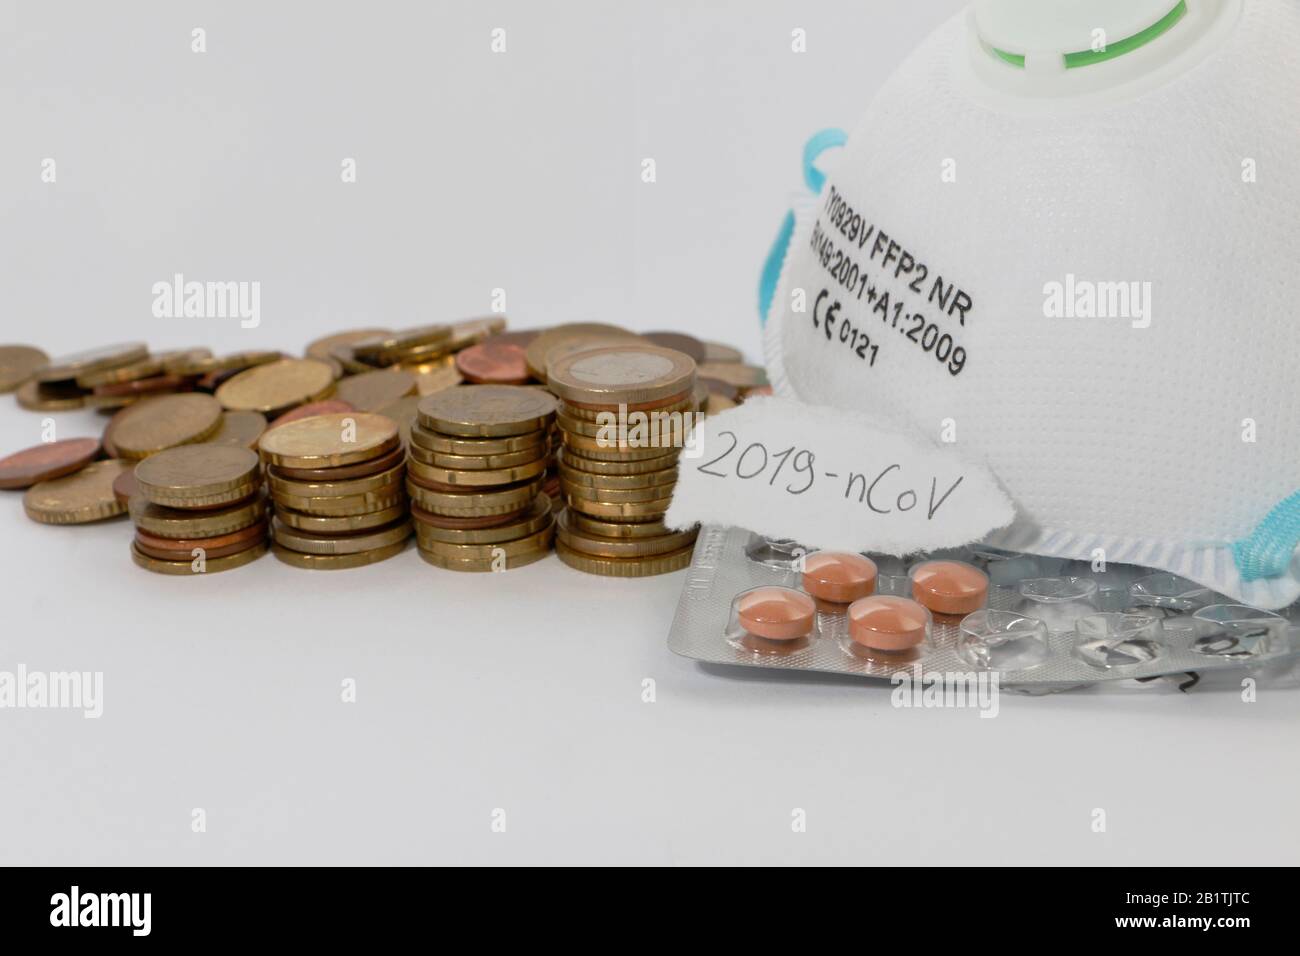 FREIBURG, GERMANY - FEB 24, 2020: A medical mask, coins and medication representing the increasing costs caused by the new corona virus / 2019-nCov. T Stock Photo